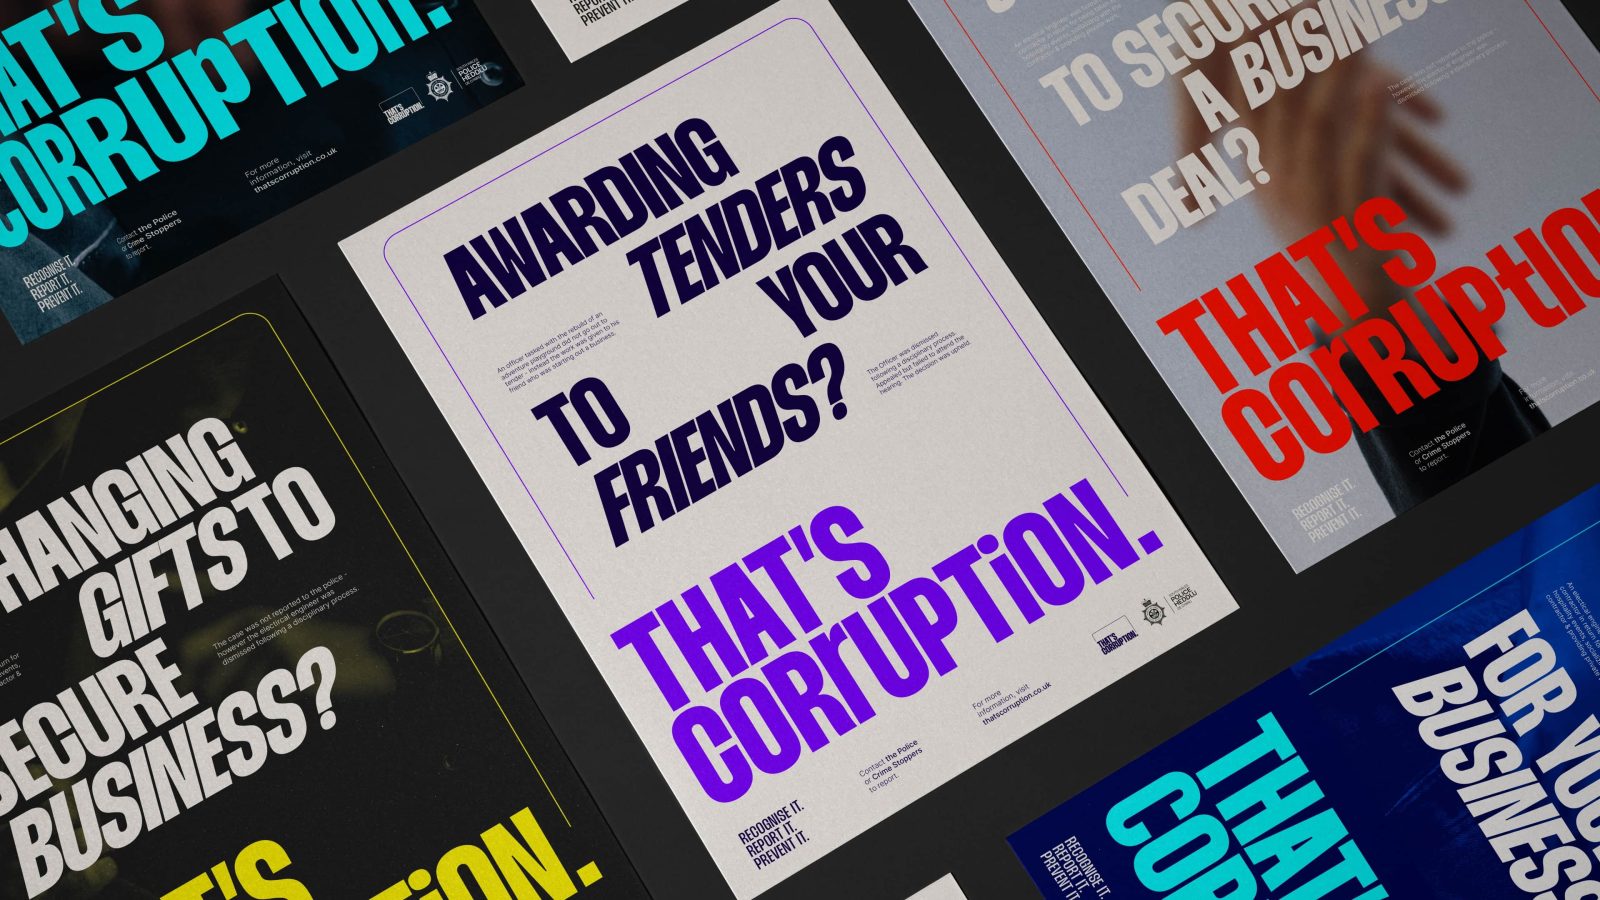 A collection of anti-corruption campaign posters with bold text like 